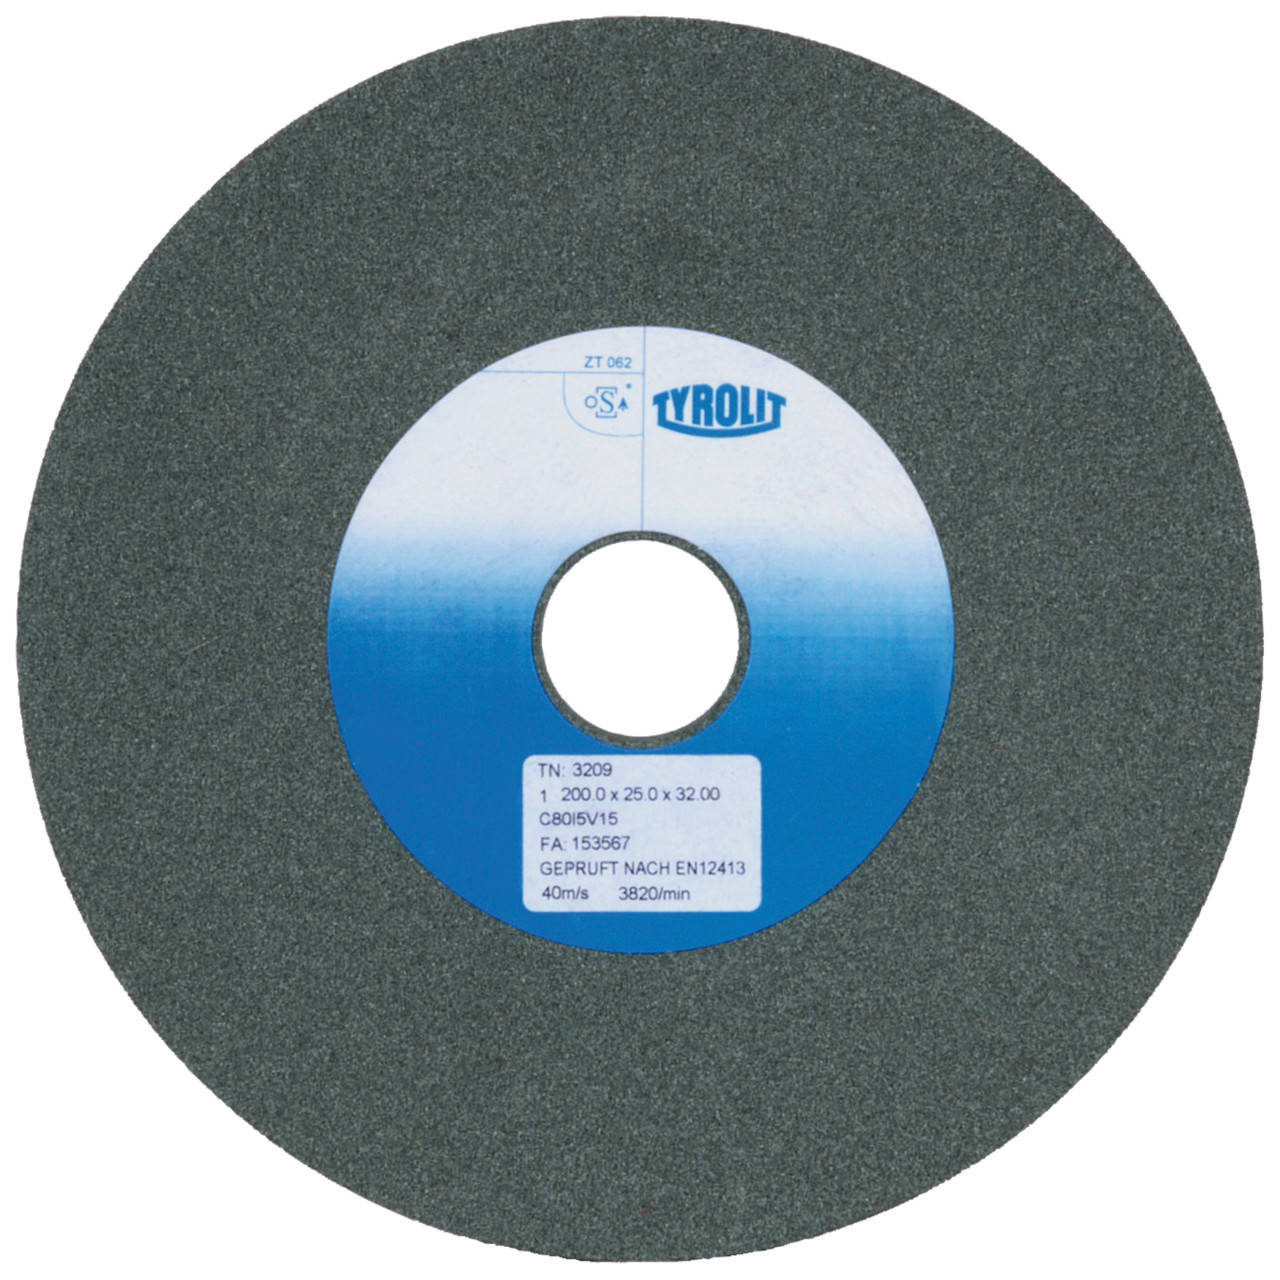 Tyrolit Conventional ceramic grinding discs DxDxH 200x25x76.2 For carbide and cast iron, shape: 1, Art. 103851